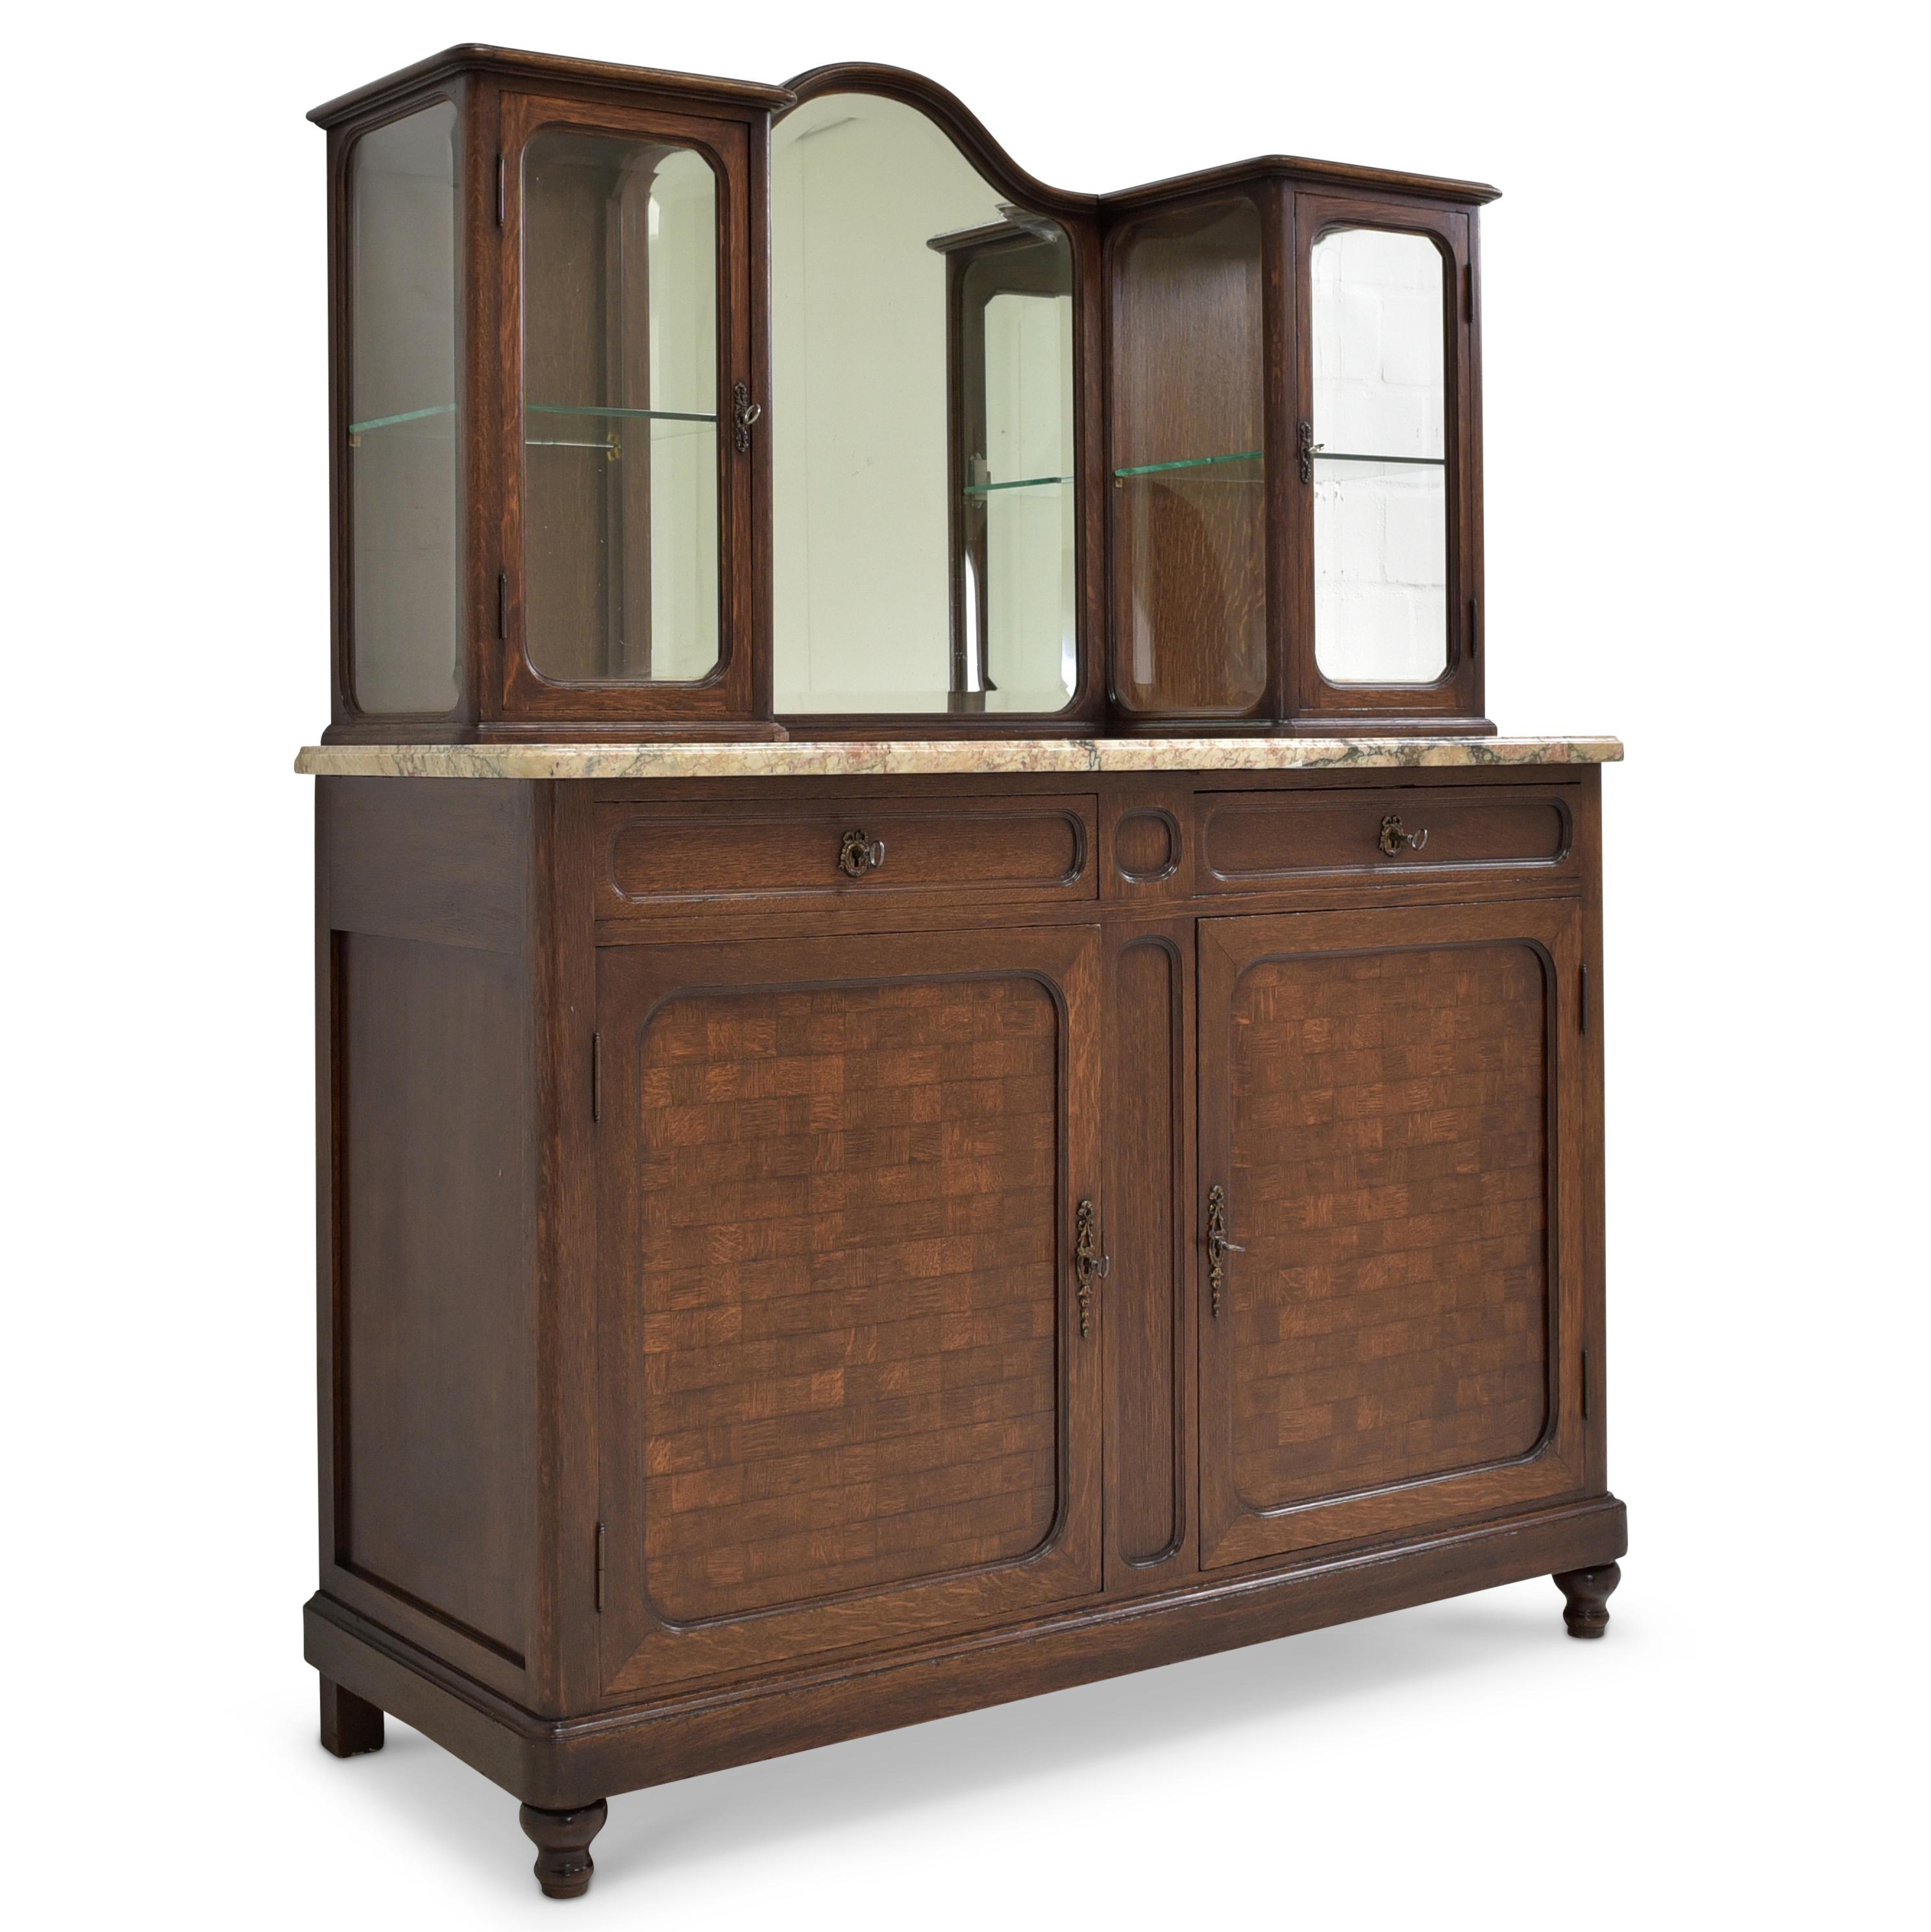 Display cabinet restored Art Deco around 1925 oak sideboard buffet

Features:
Two-door base with shelf and two drawers
Essay on marble slab with two vitrines and mirror
High quality
Drawers pronged
Original fittings
Seven-part glazing with